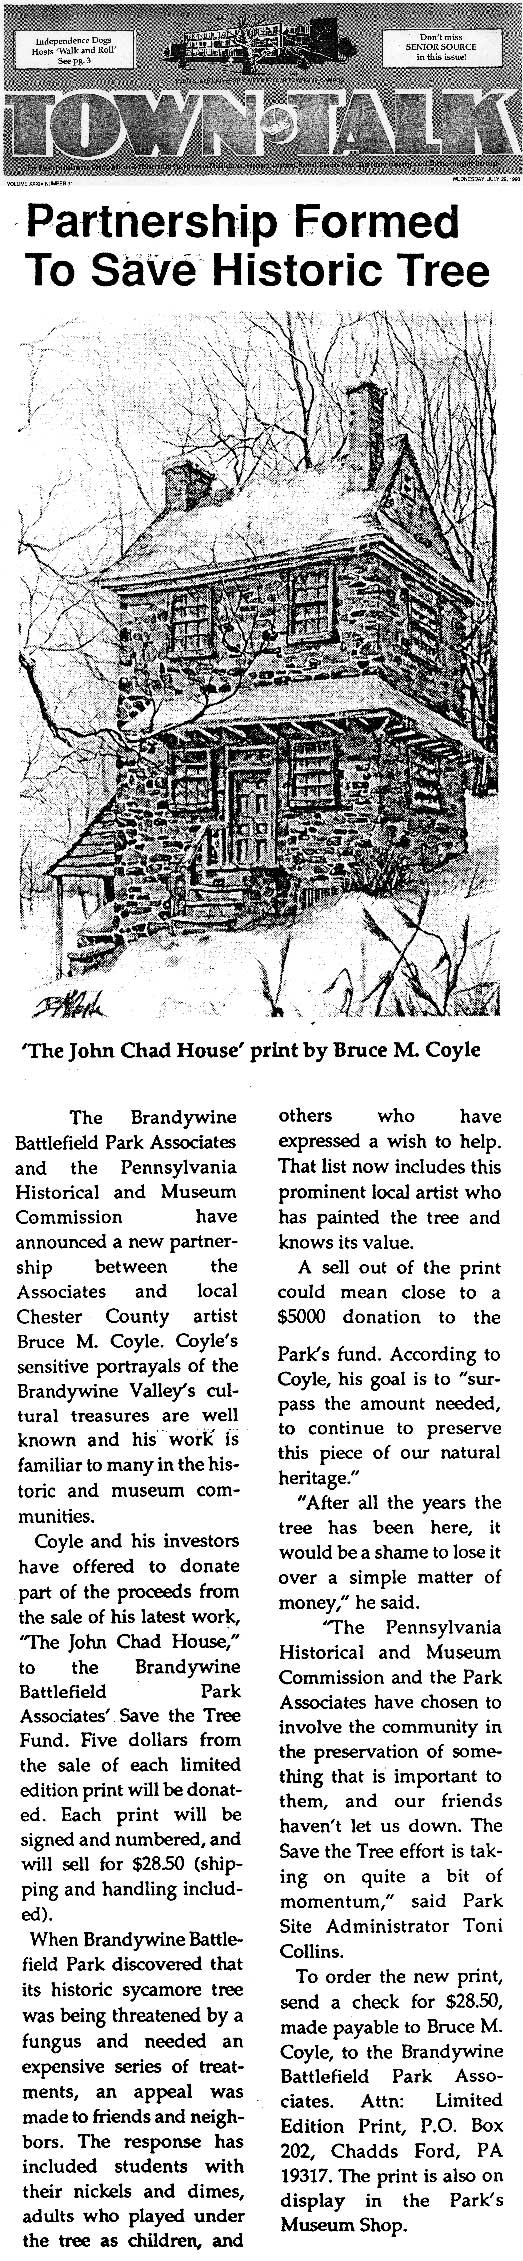 Bruce M Coyel in Town Talk July 29, 1998